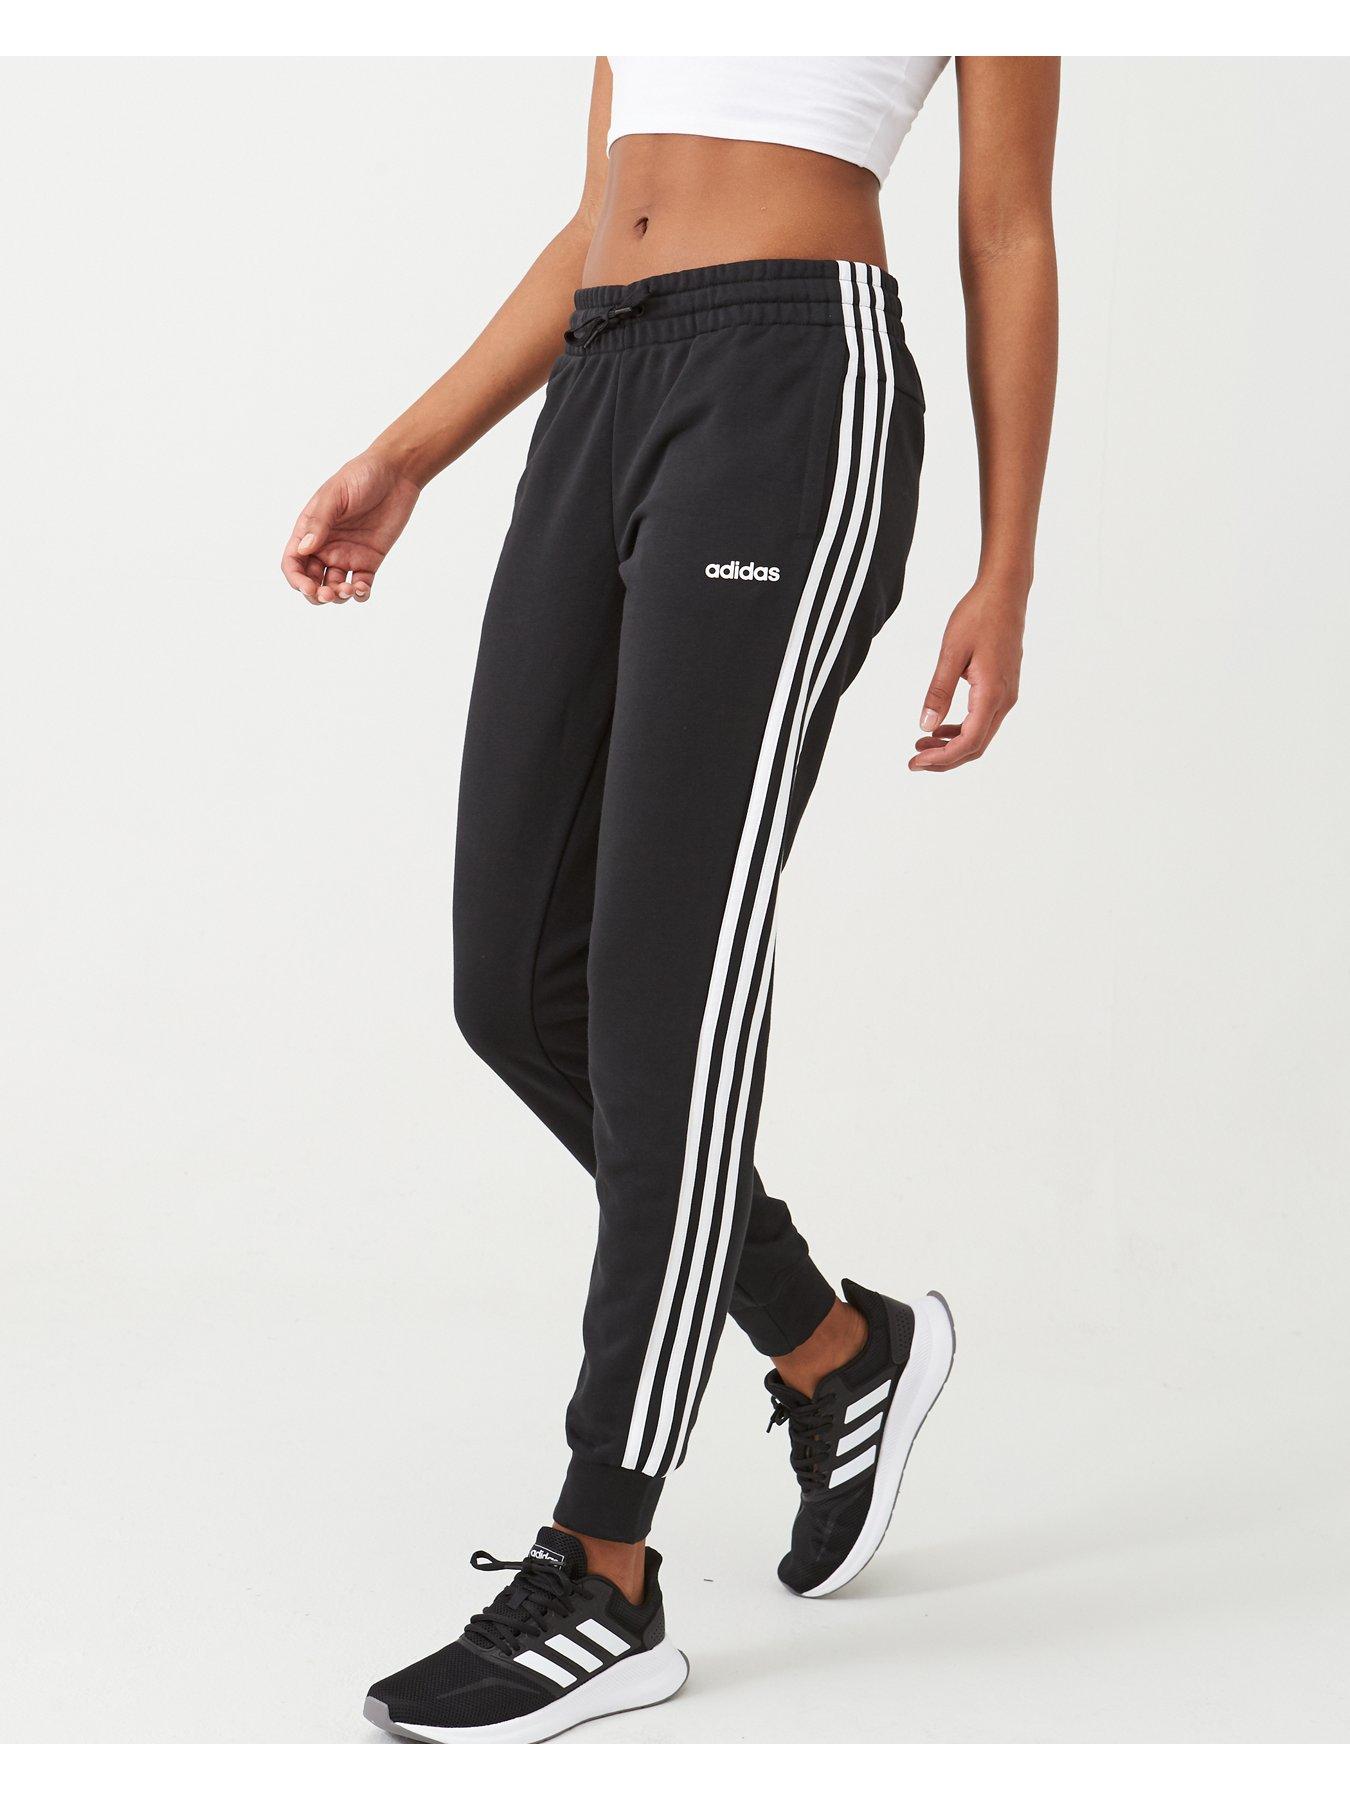 adidas tracksuit sports direct womens